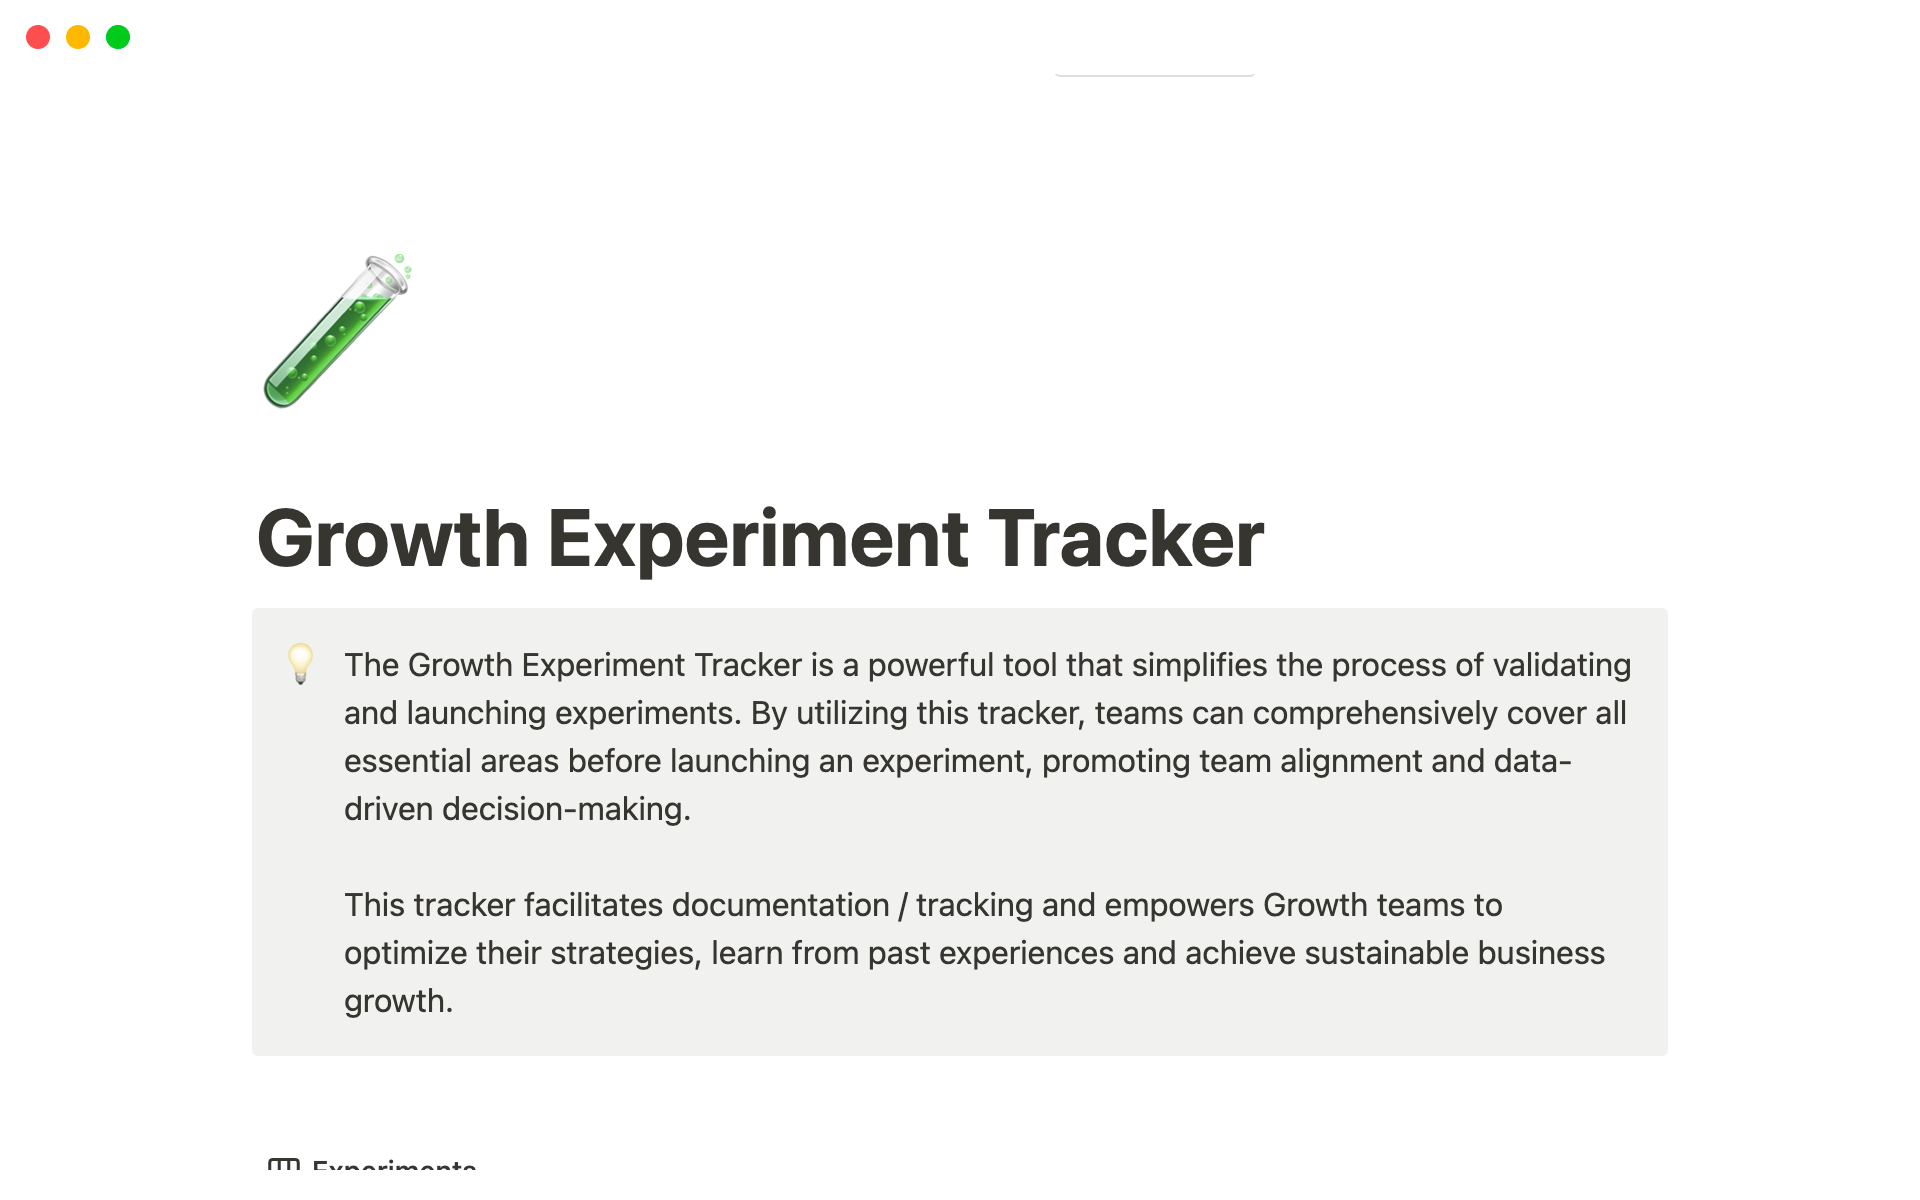 This tracker facilitates documentation / tracking and empowers Growth teams to optimize their strategies, learn from past experiences and achieve sustainable business growth.